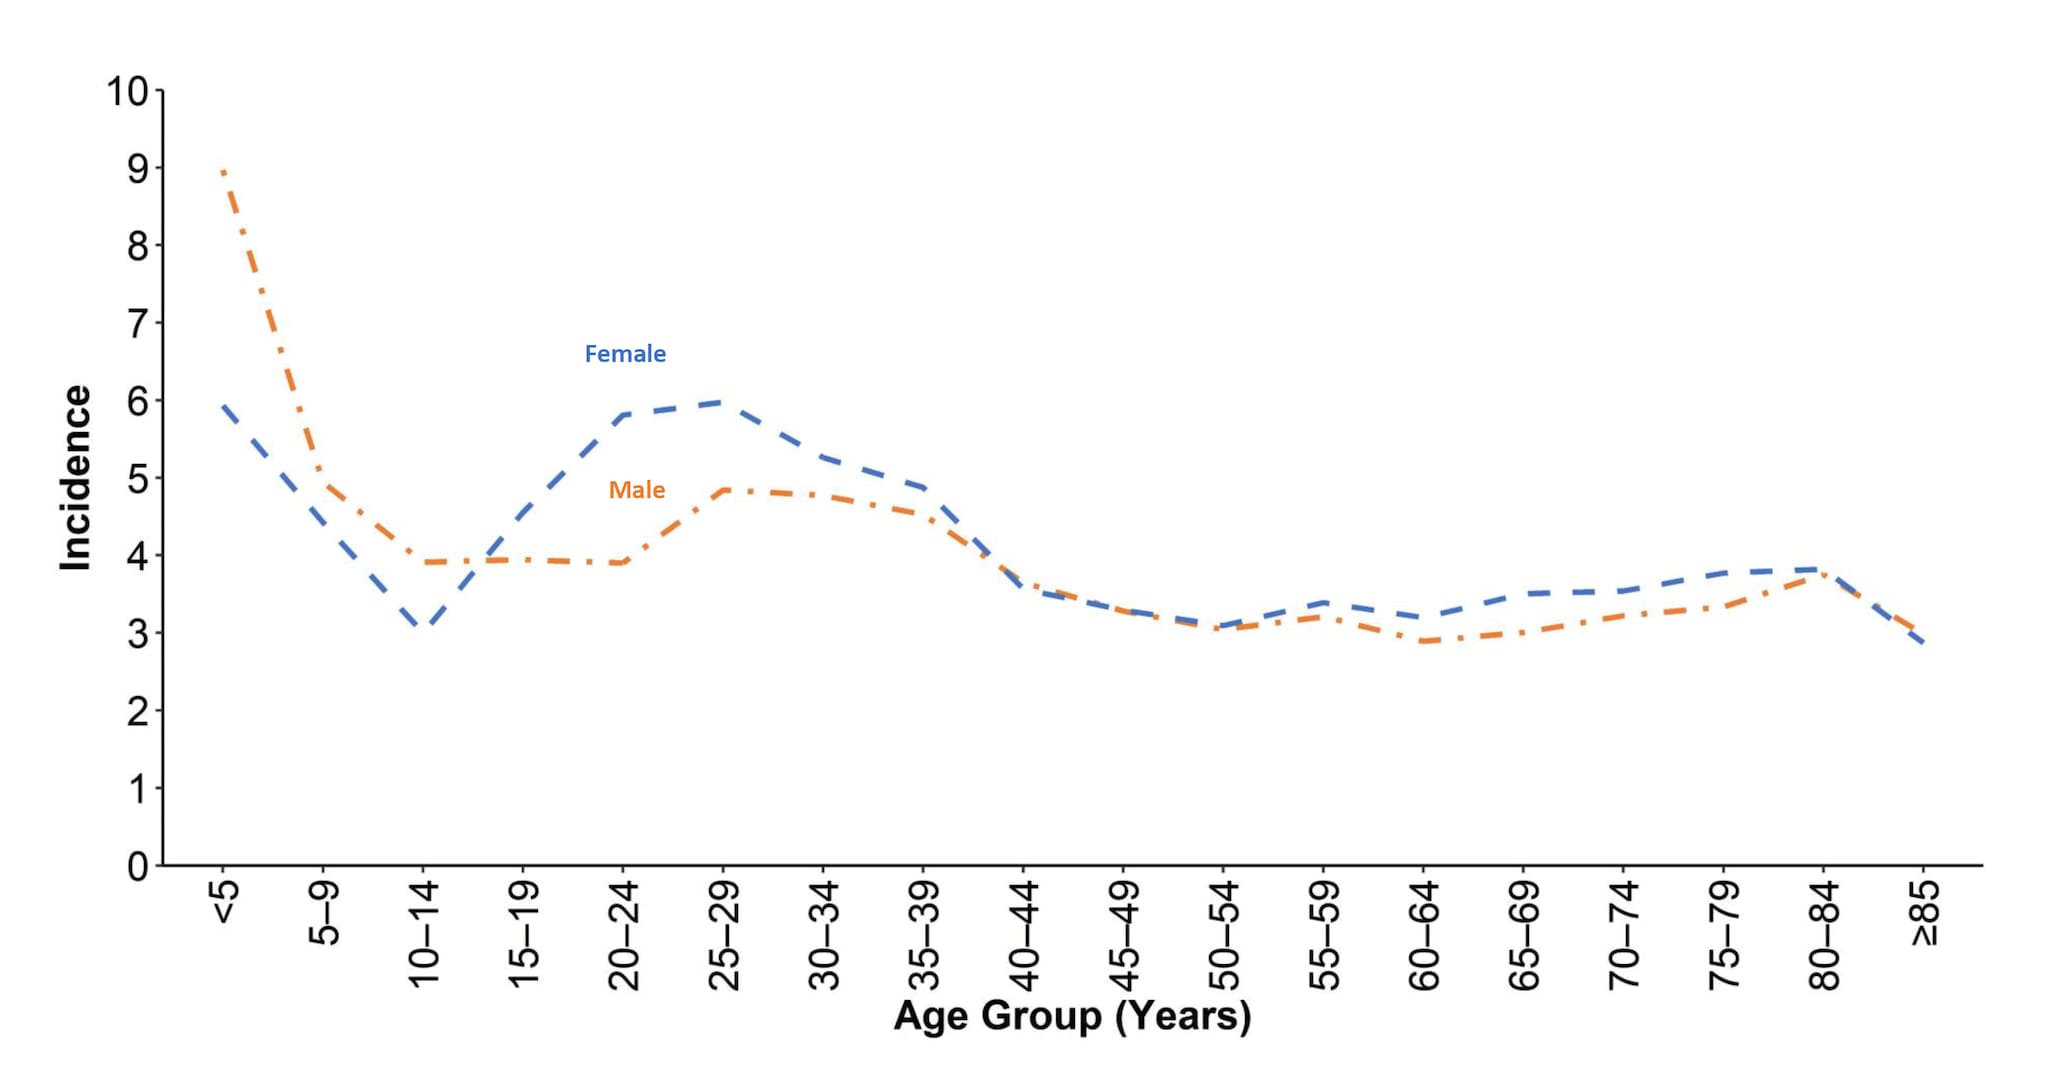 Cases by age group and sex. Represented by the height of two dashed lines, the scale for the incidence and the age groups. Sex is represented by two colored lines for all age groups.